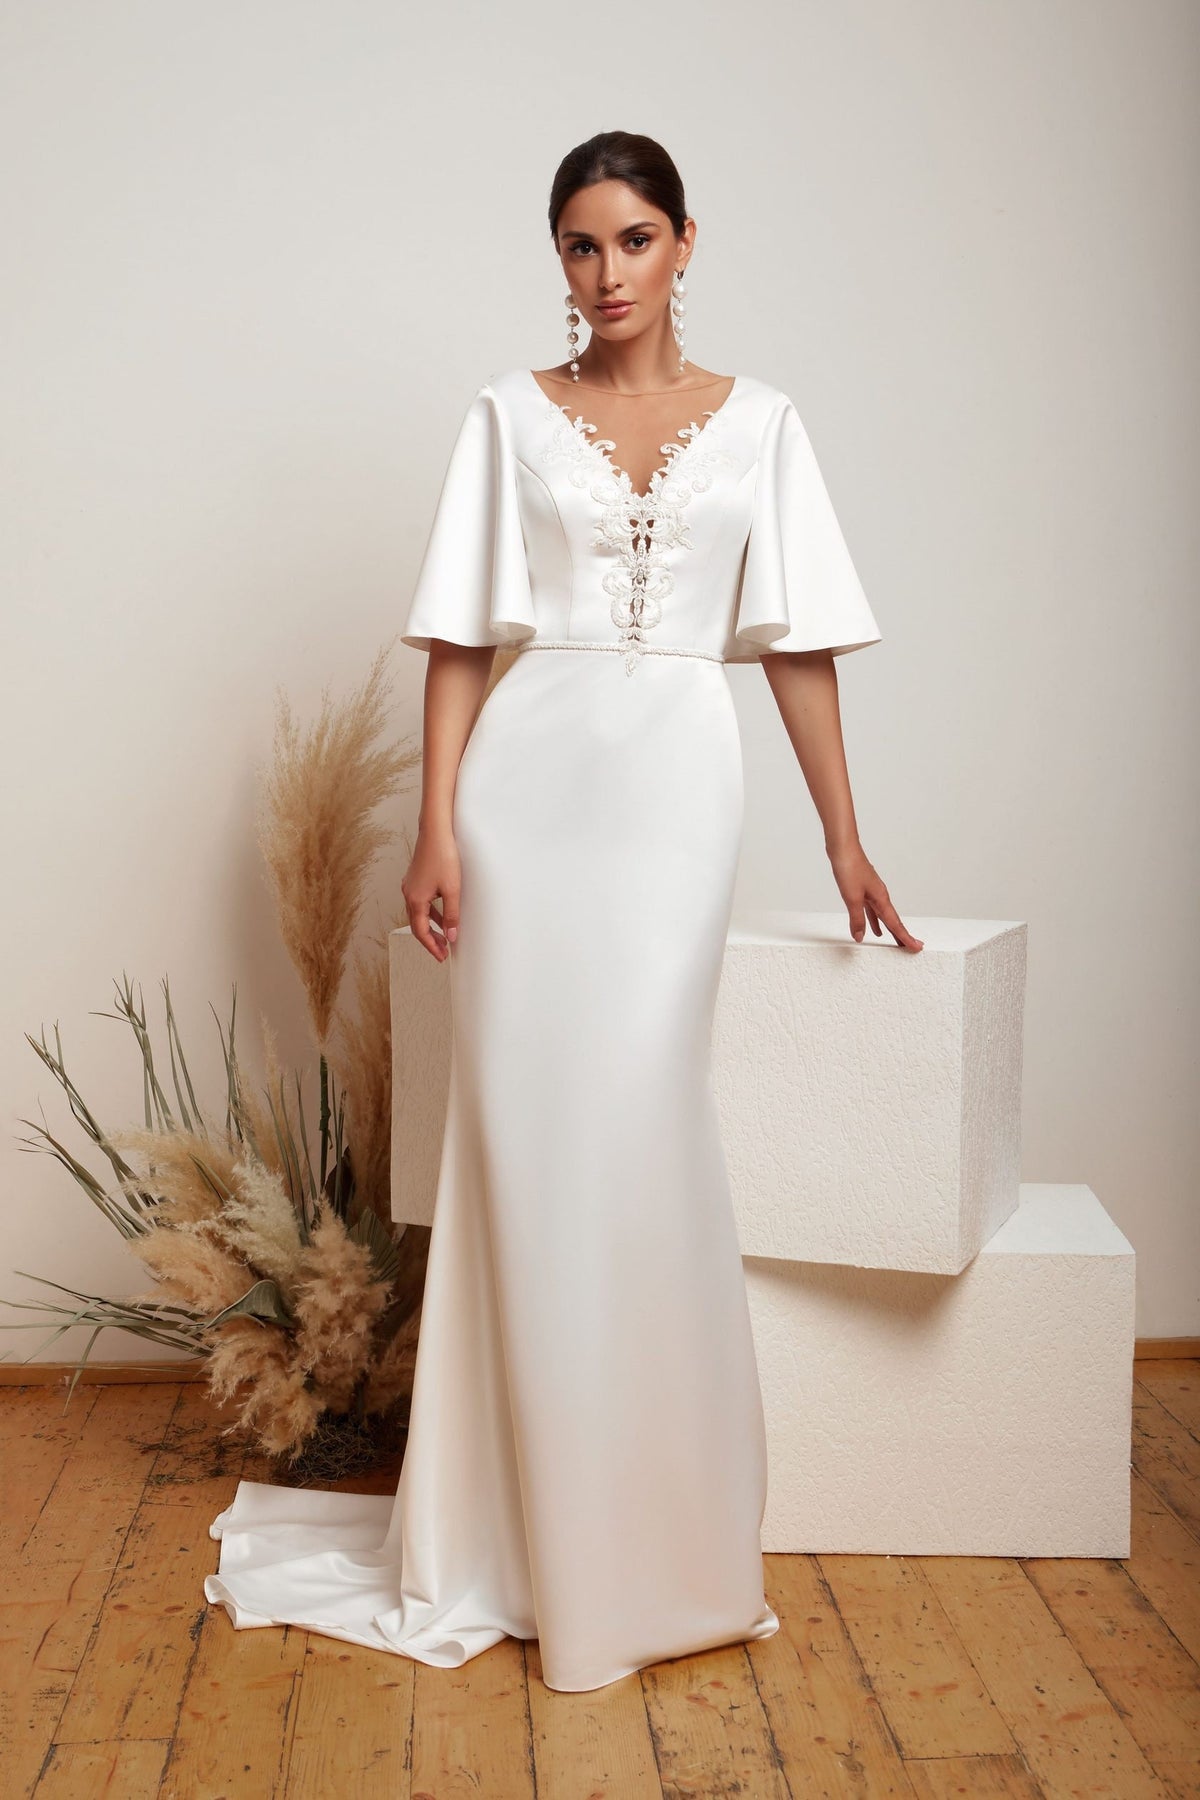 Classic Minimalist Short Flutter Sleeves Wedding Dress Bridal Gown Fit and Flare Sheath V Neckline Plunge Open Illusion Back Satin Train